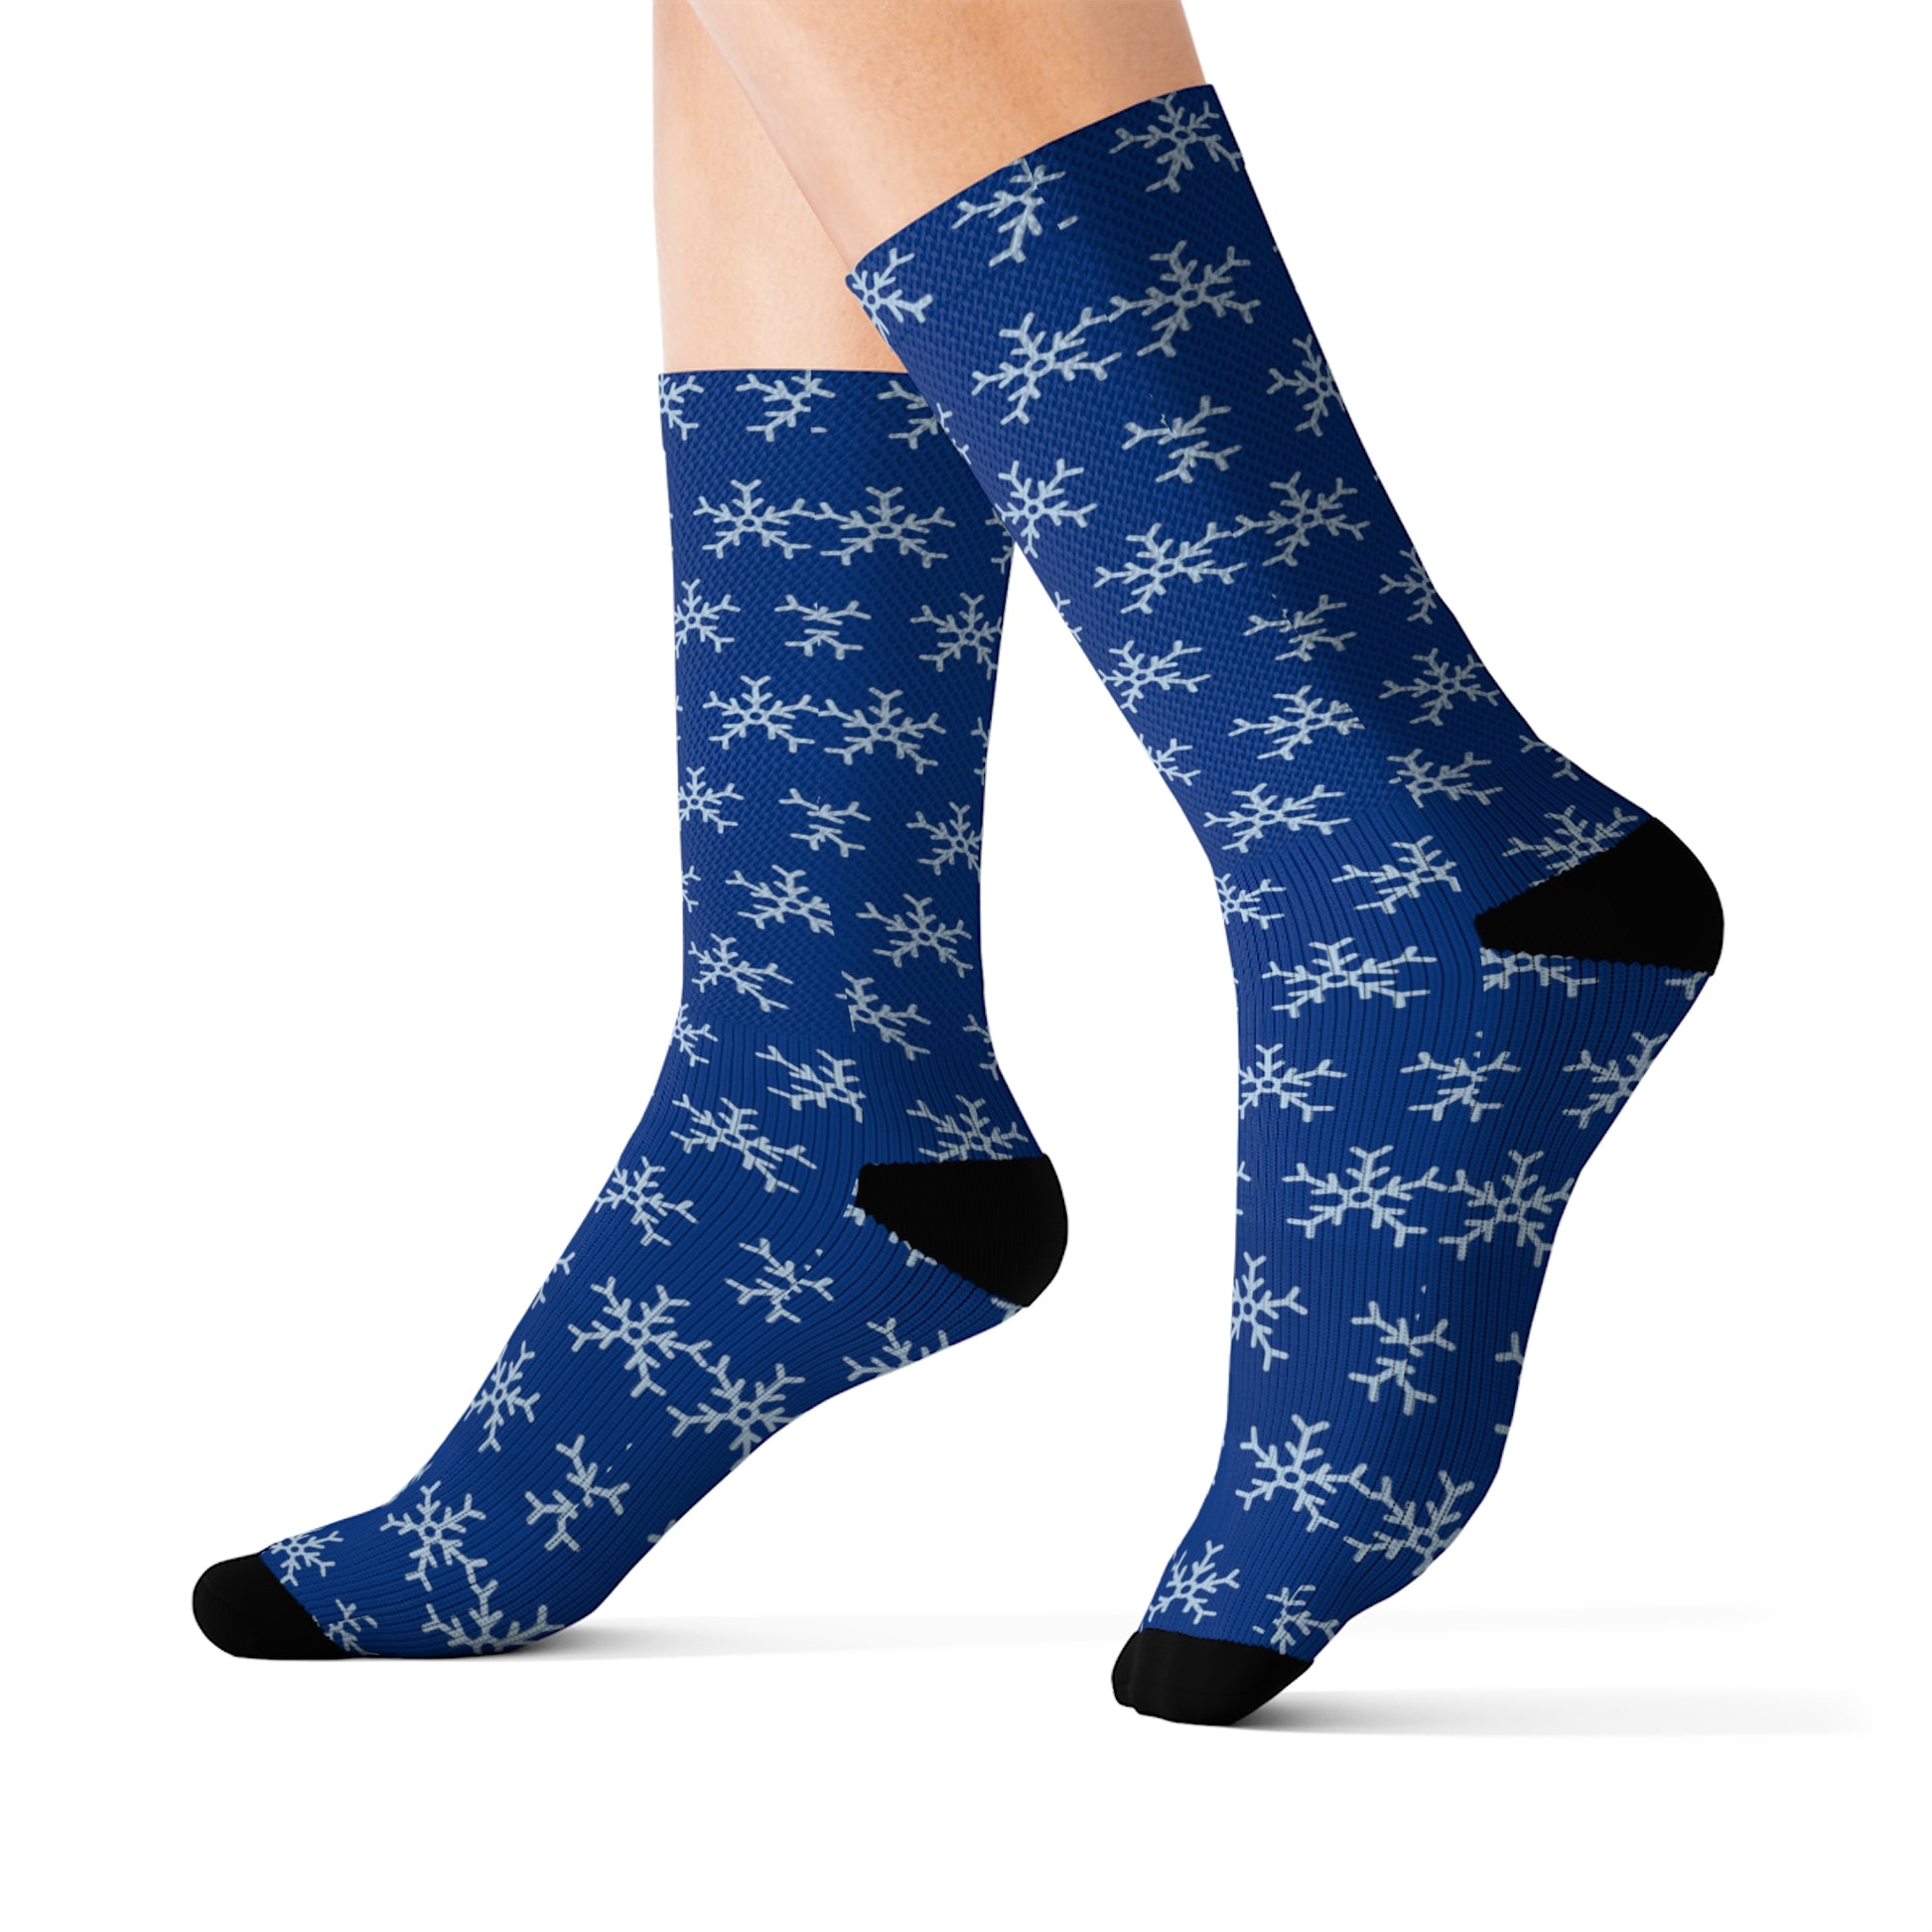 A pair of Printify blue tube socks with snowflakes on them.